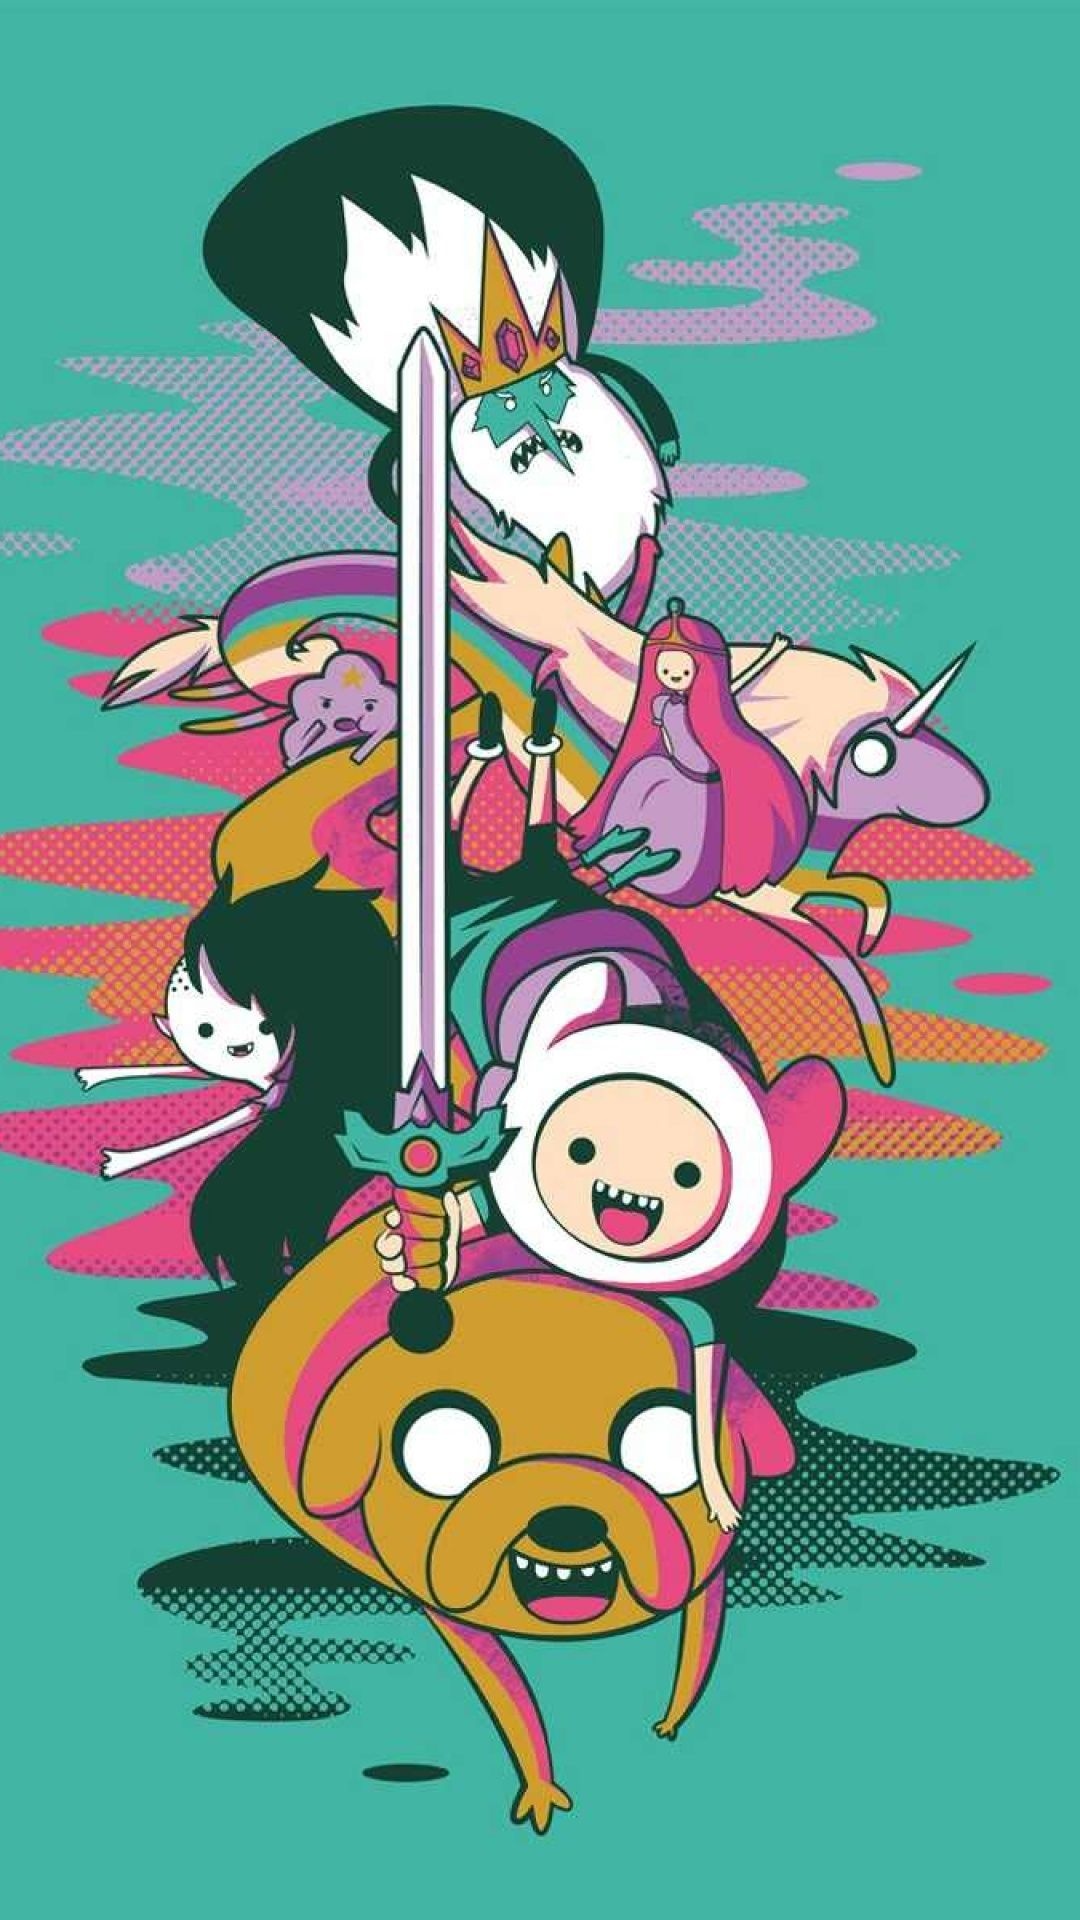 Adventure Time wallpapers, Animated series, Cartoon characters, Adventure Time art, 1080x1920 Full HD Phone